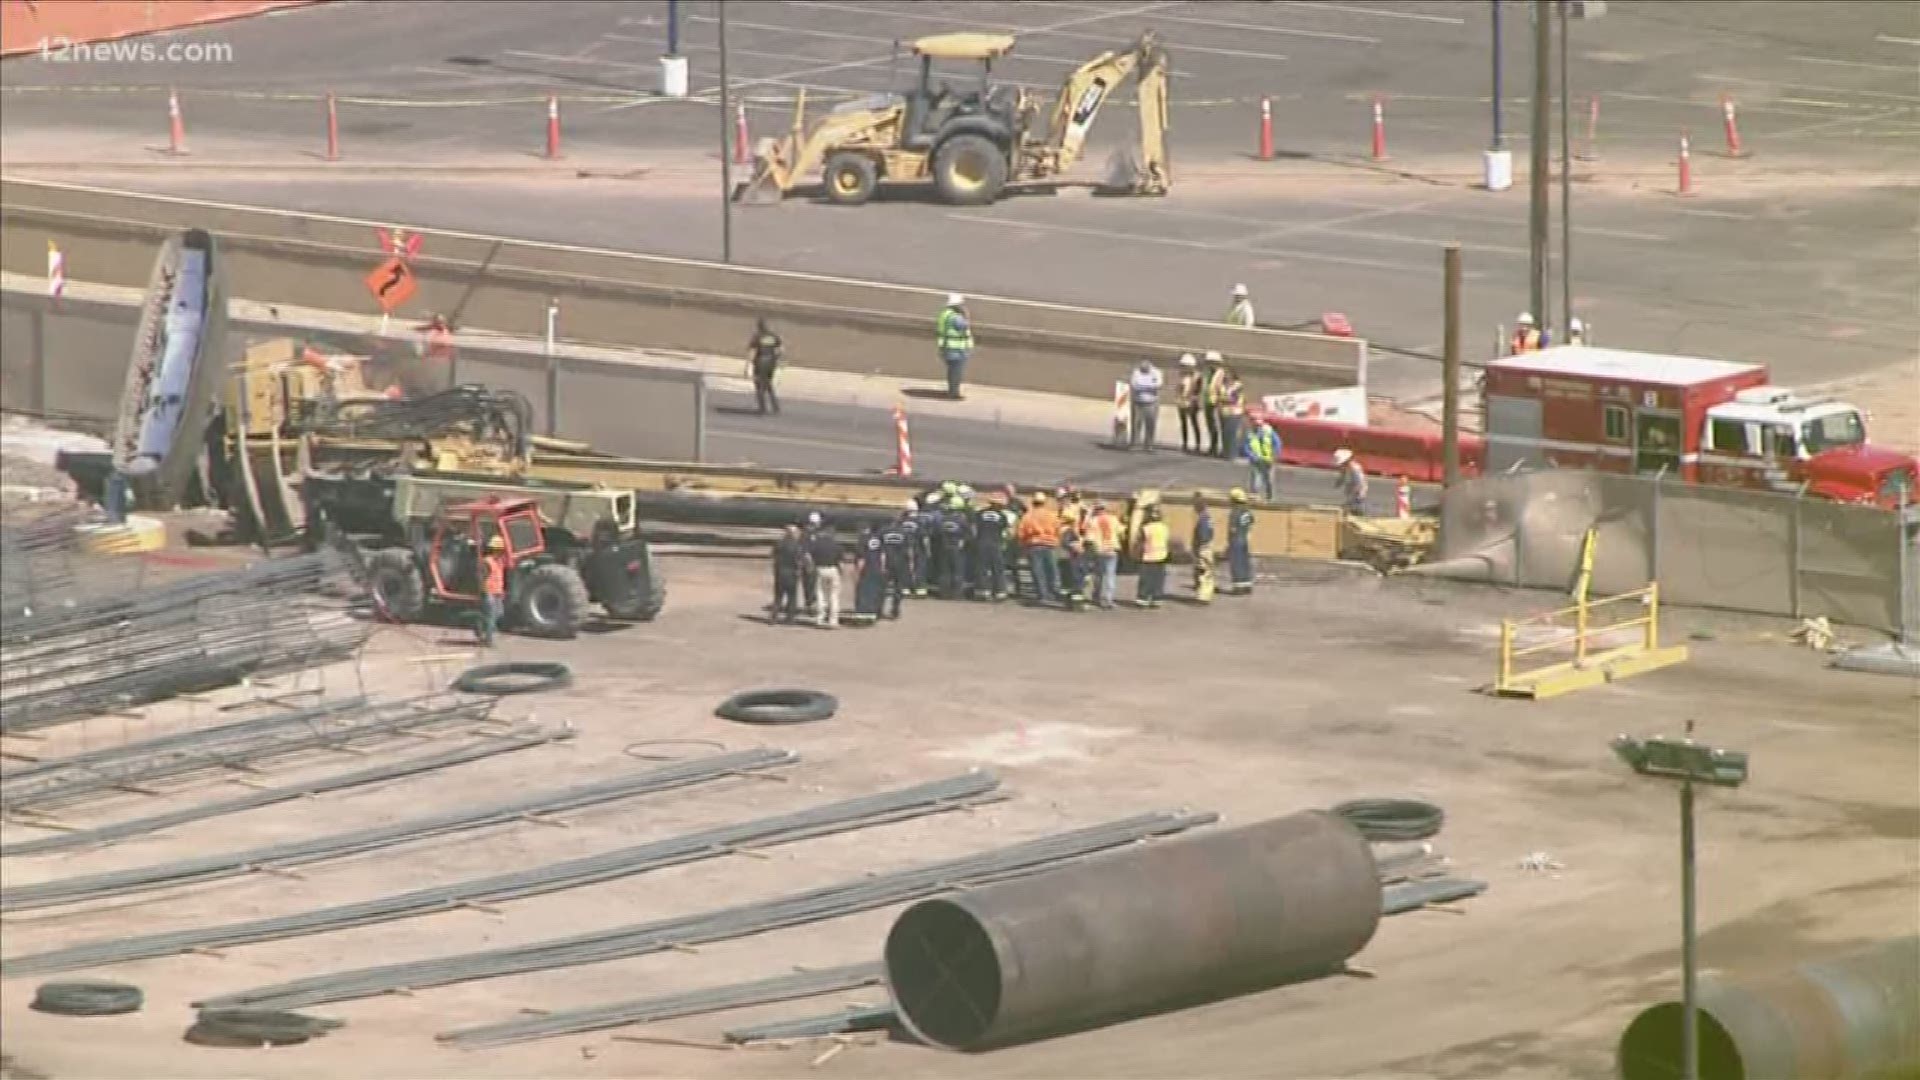 A person is still "unaccounted" for after a crane collapsed at Sky Harbor International Airport.